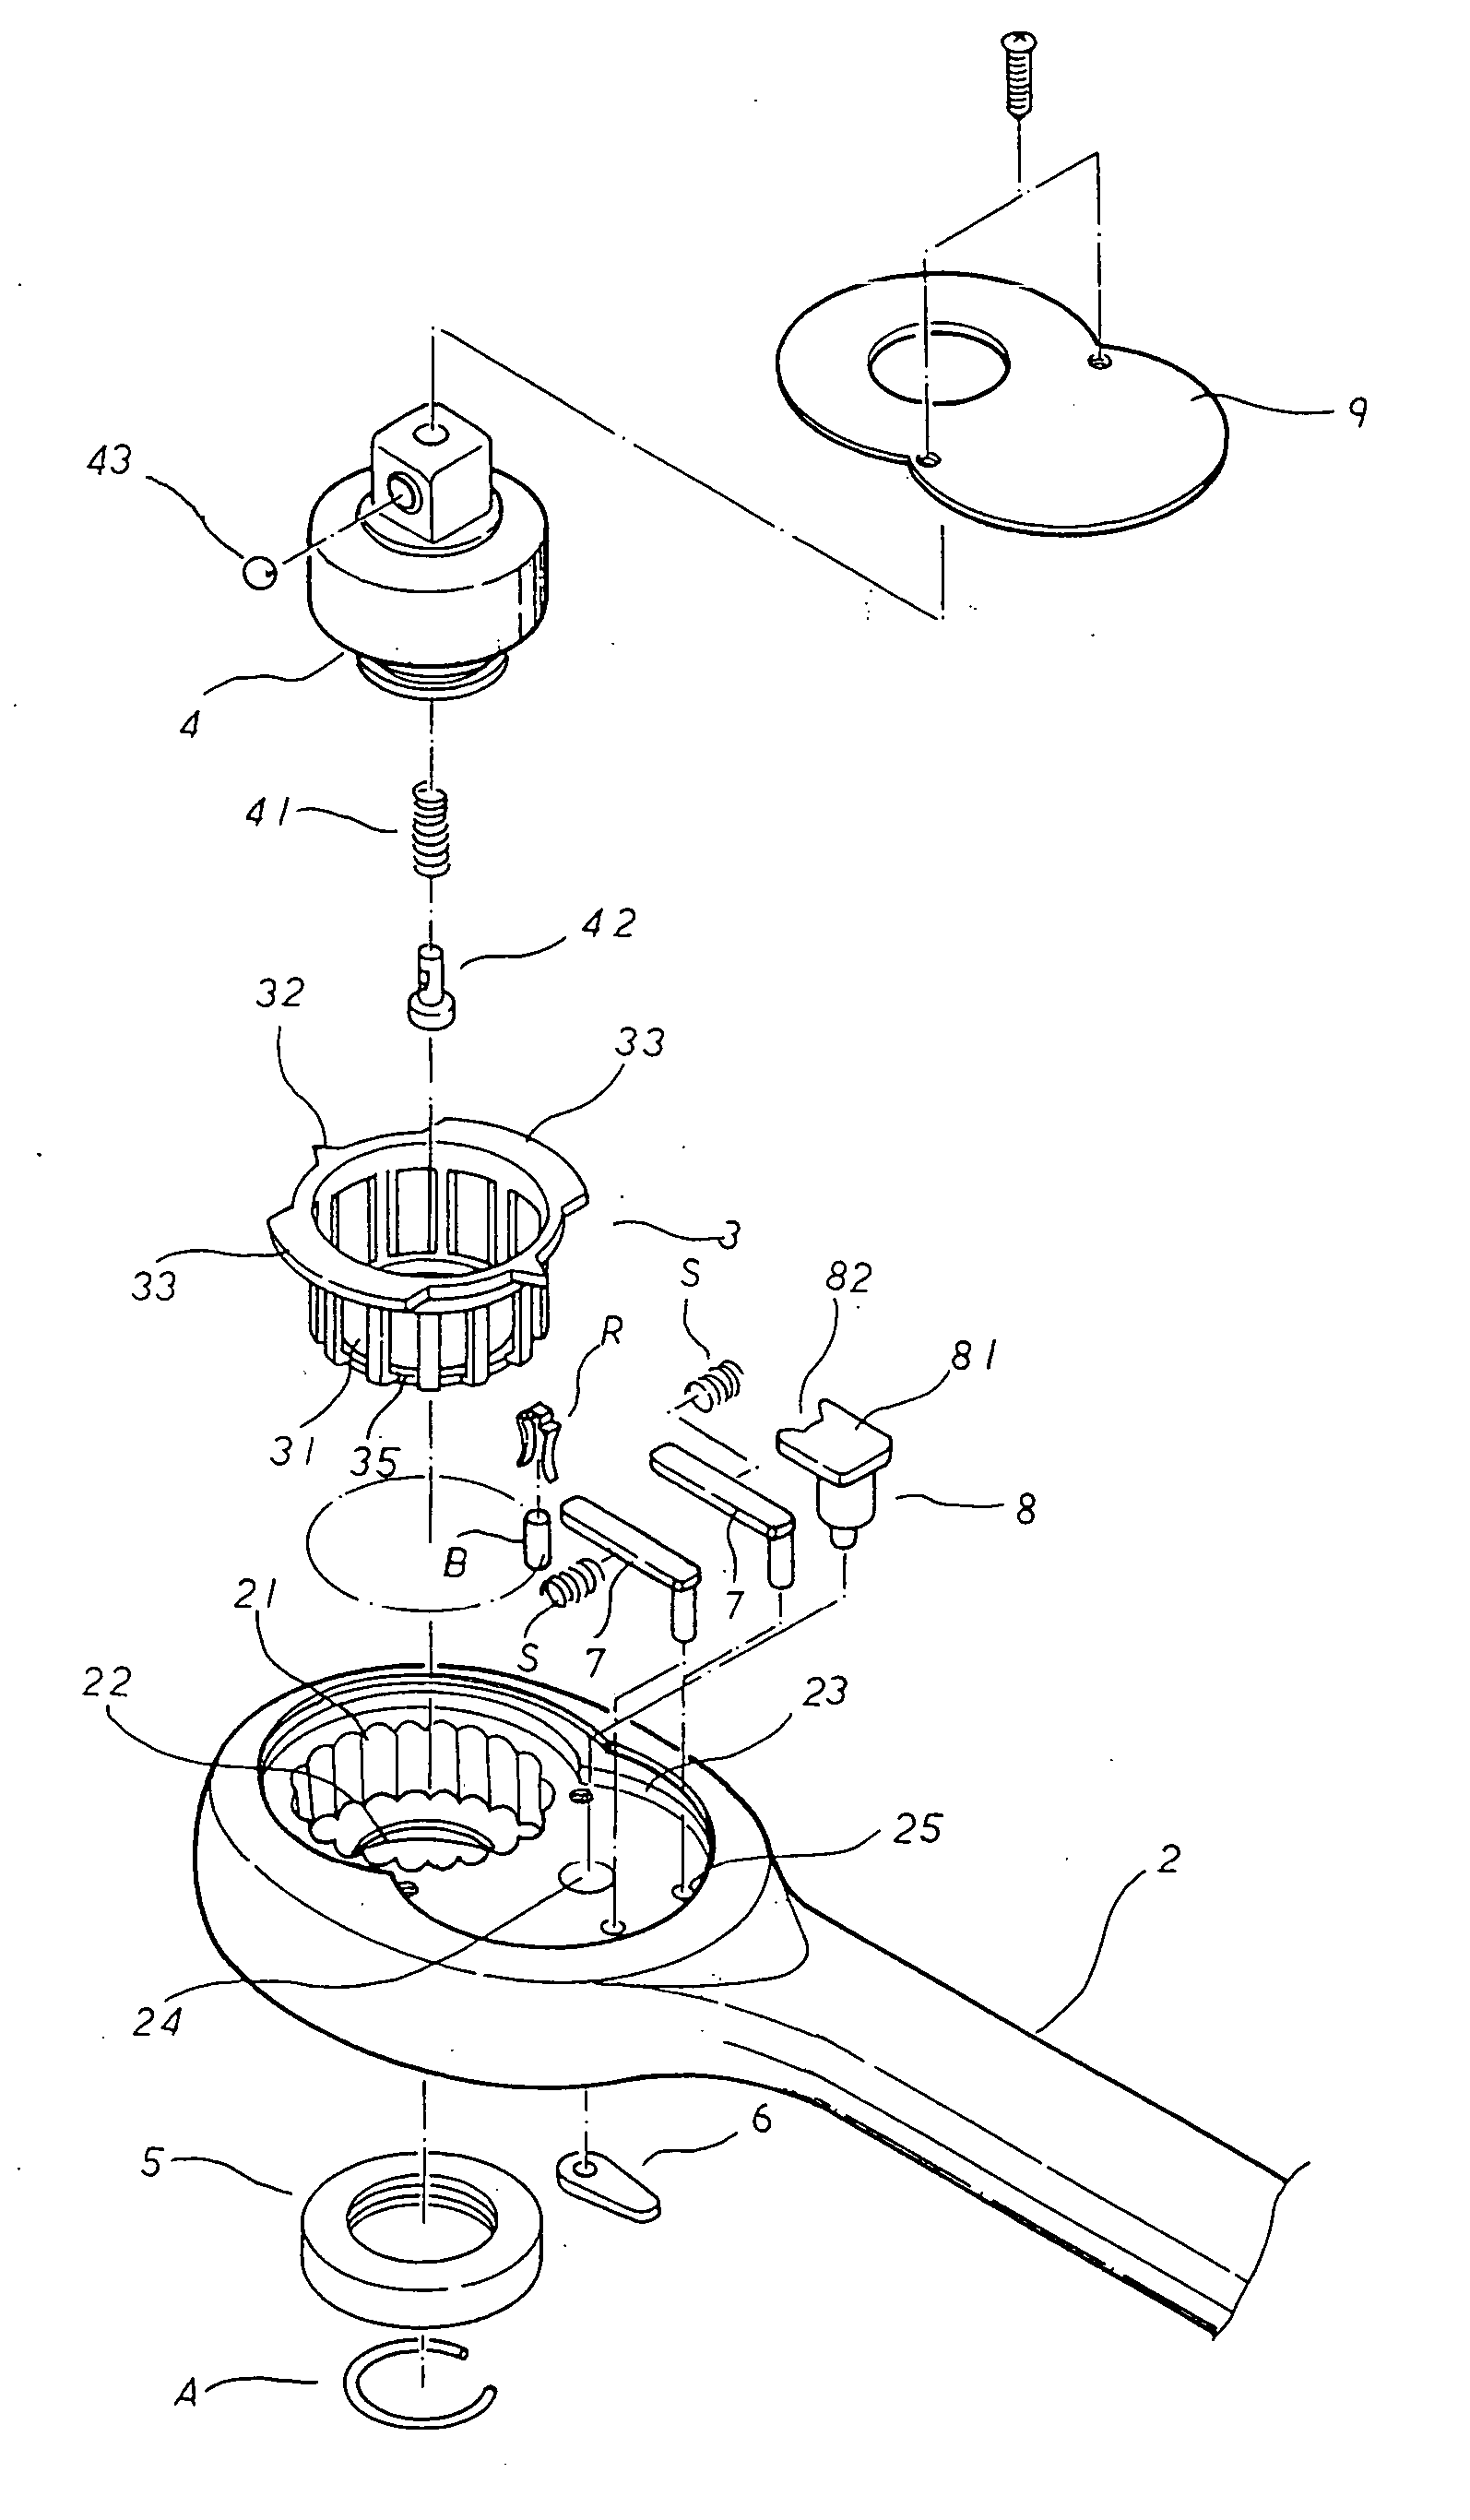 Torque-indicating socket wrench control mechanism